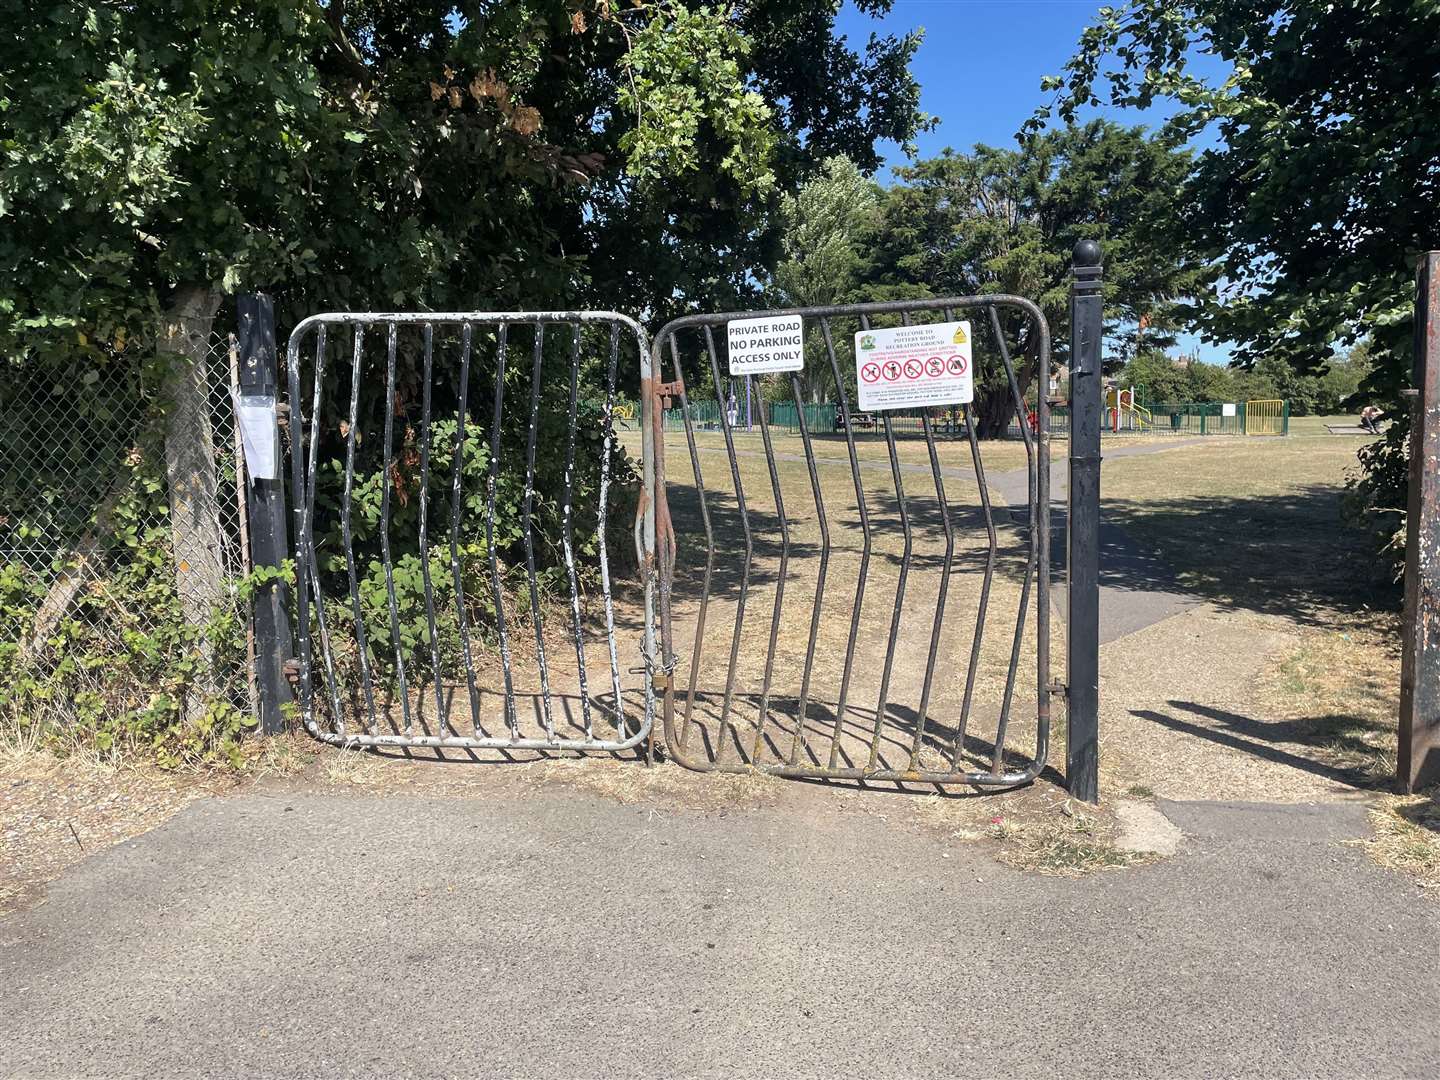 It's thought the travellers opened a gate for the park just off Main Road, Hoo